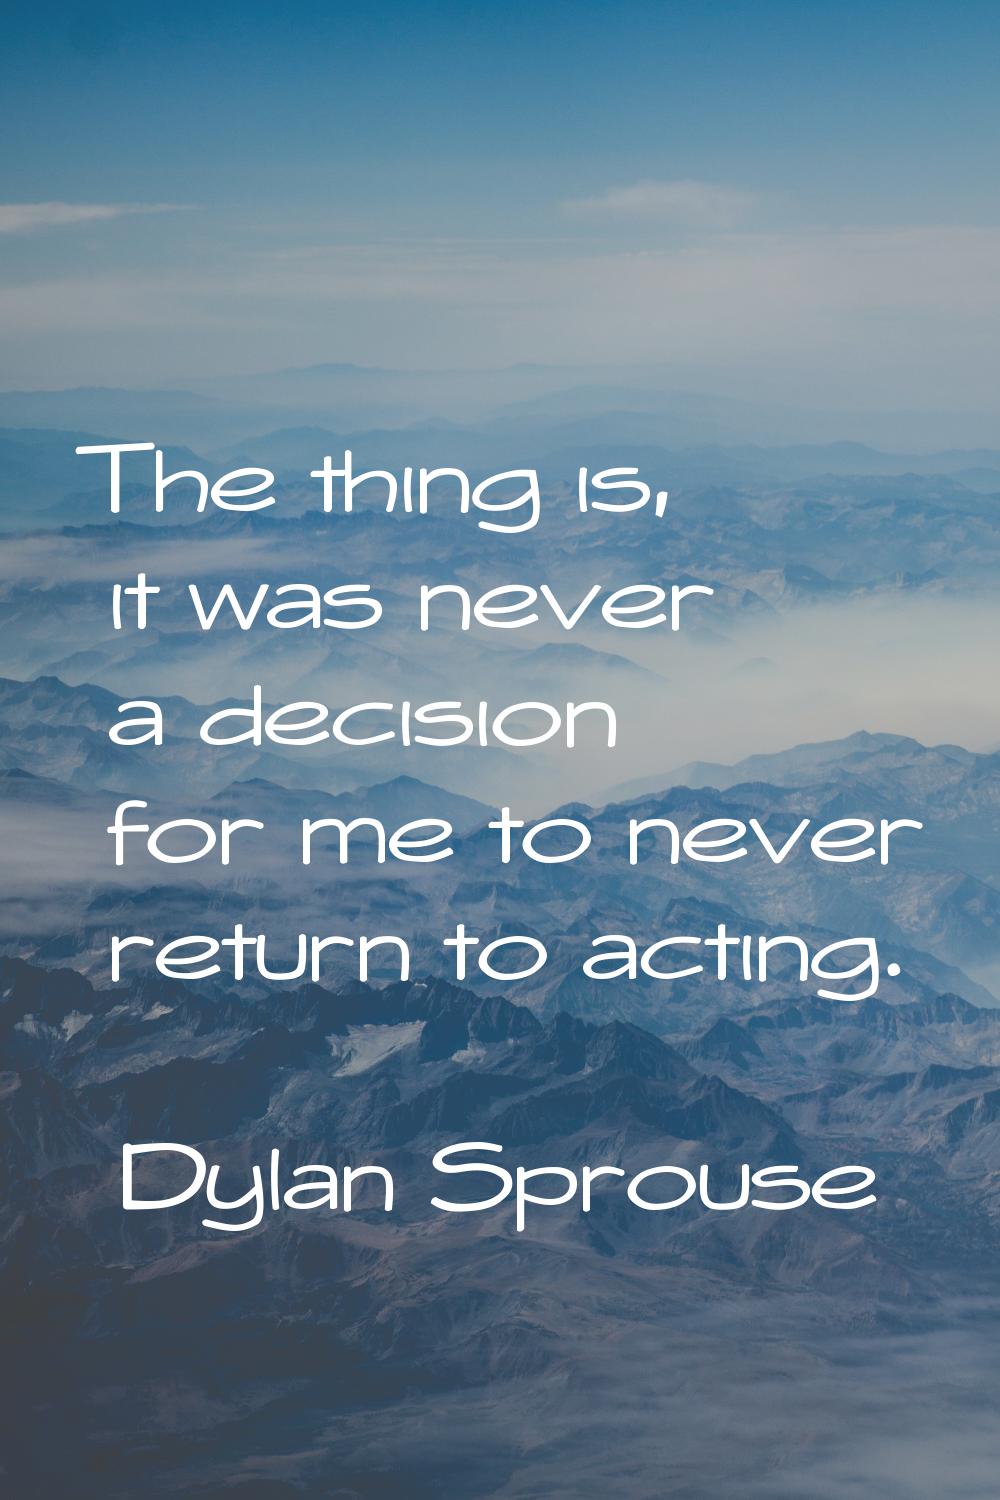 The thing is, it was never a decision for me to never return to acting.